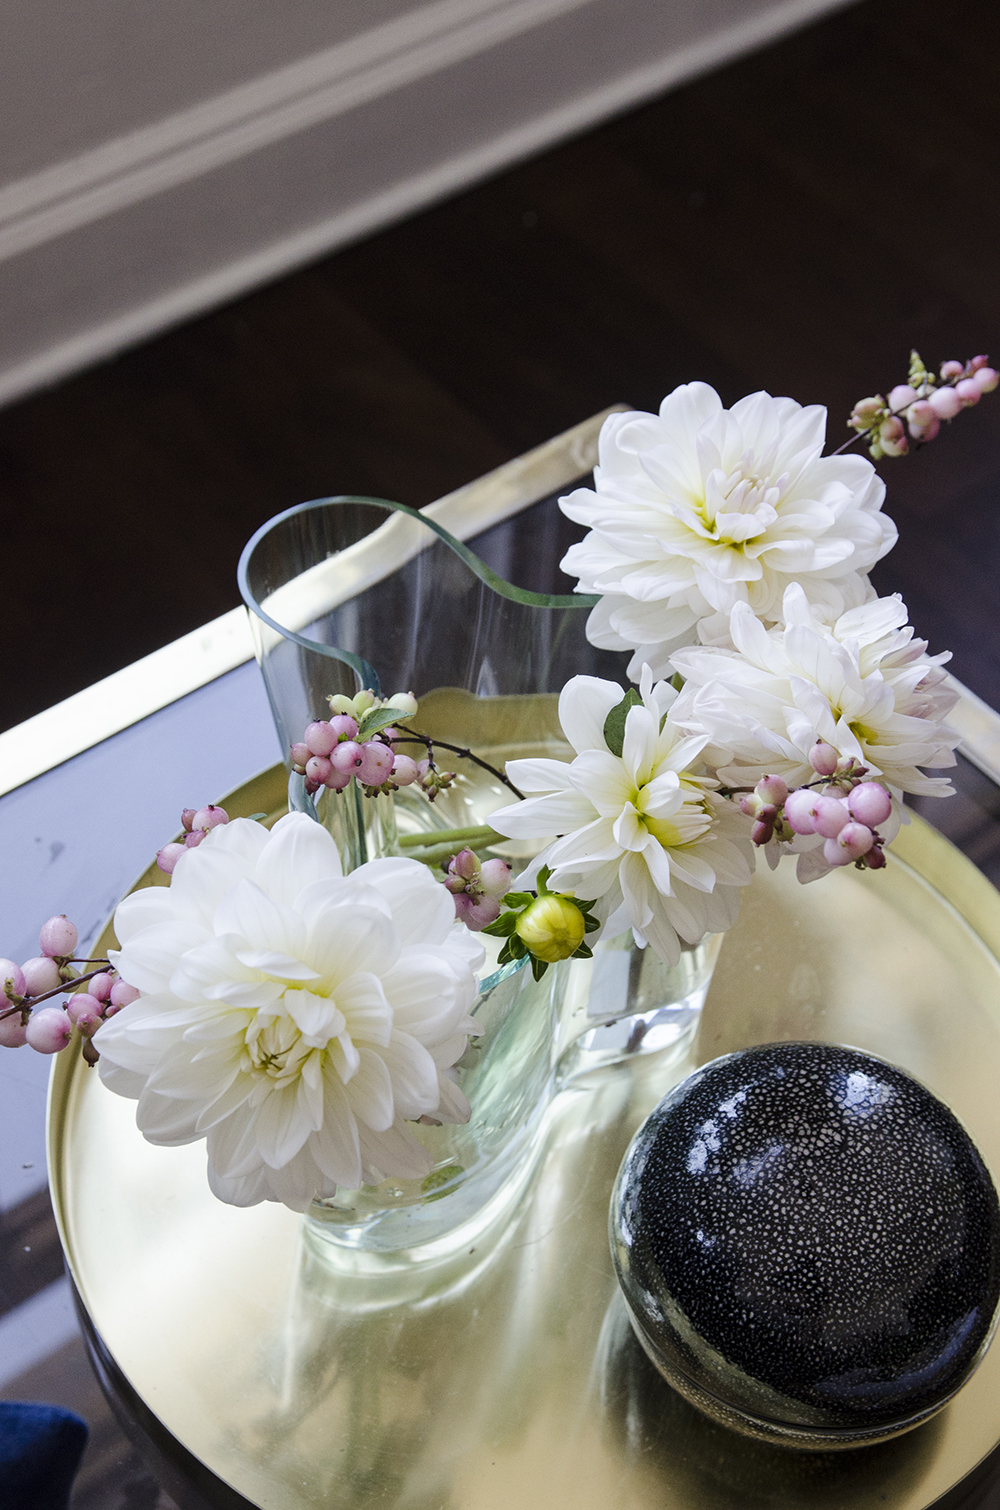 5 tips for keeping your flowers fresh